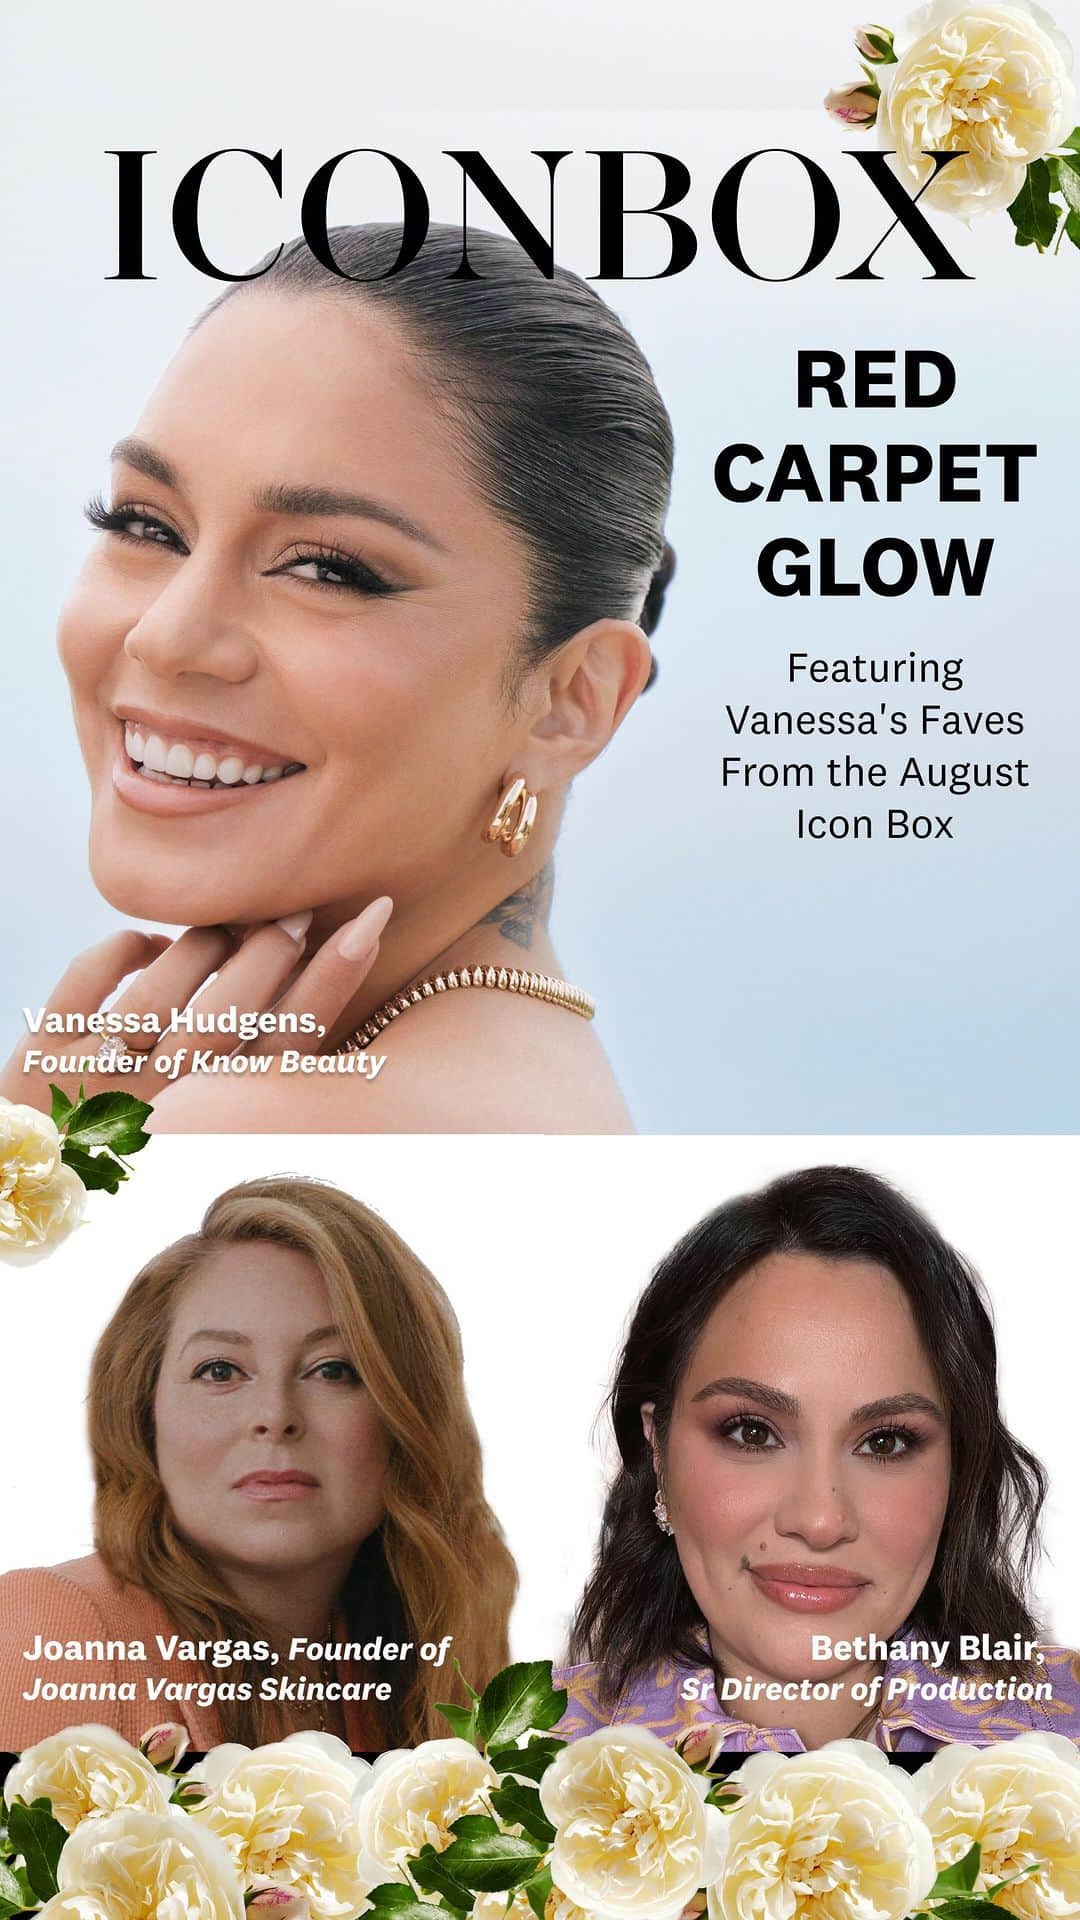 ipsyのインスタグラム：「GIVEAWAY! Want to win some of @vanessahudgens favorite products from her Icon Box, including @knowbeauty + @joannavargas? Follow the rules below to enter! #IconBoxbyVanessaHudgens  1. Follow @ipsy @knowbeauty @joannavargas on Instagram 2. Like this post 3. Tag a friend in the comments below 4. Include #IPSY #Giveaway in your comment  Deadline to enter is 09/22/23 at 11:59 p.m. PT and the winner will be contacted on 9/25/23 via Instagram DM. ⁠To enter this giveaway, you must be 18 years old or older and a resident of the U.S. or Canada (excluding the Province of Quebec). By posting your comment with these hashtags, you agree to be bound by the terms of the Official Giveaway Rules at http://www.ipsy.com/contest-terms. This giveaway is in no way sponsored, endorsed or administered by, or associated with, Instagram.」